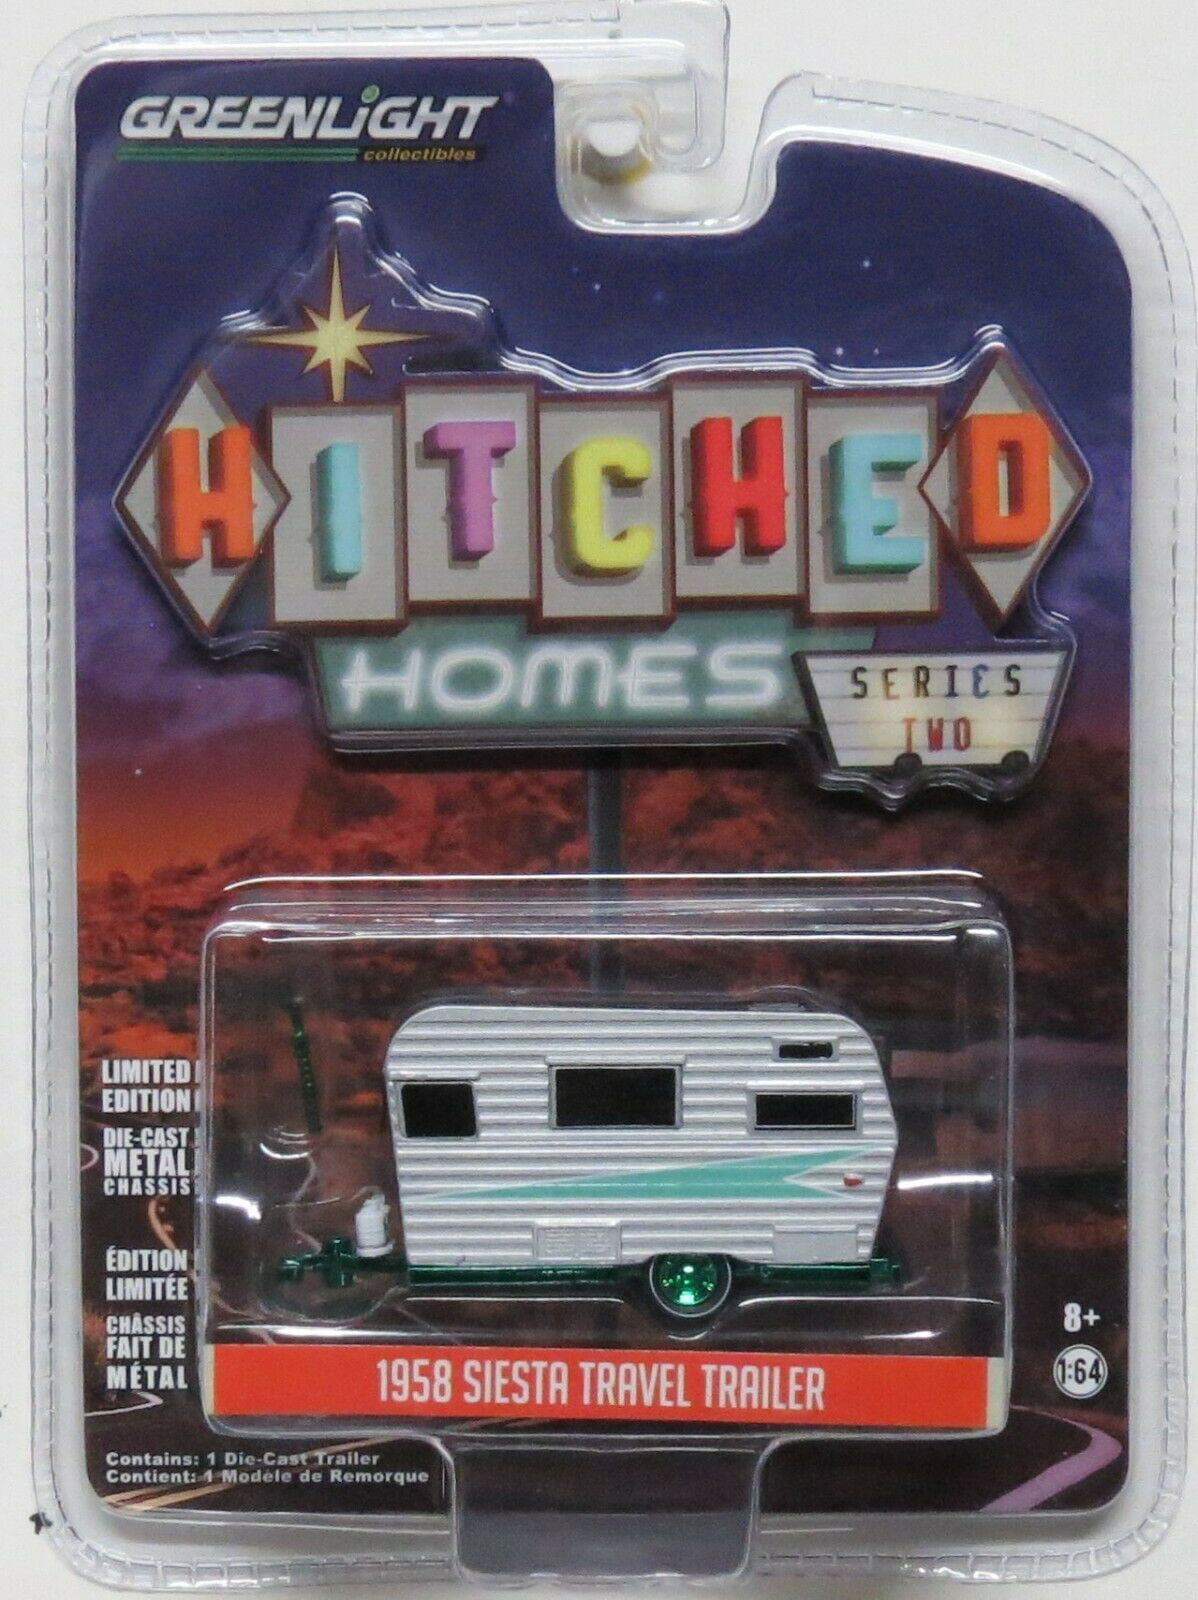 GREENLIGHT HITCHED HOMES SERIES 2 SET OF 6 TRAILERS 1/64 DIECAST MODELS 34020 